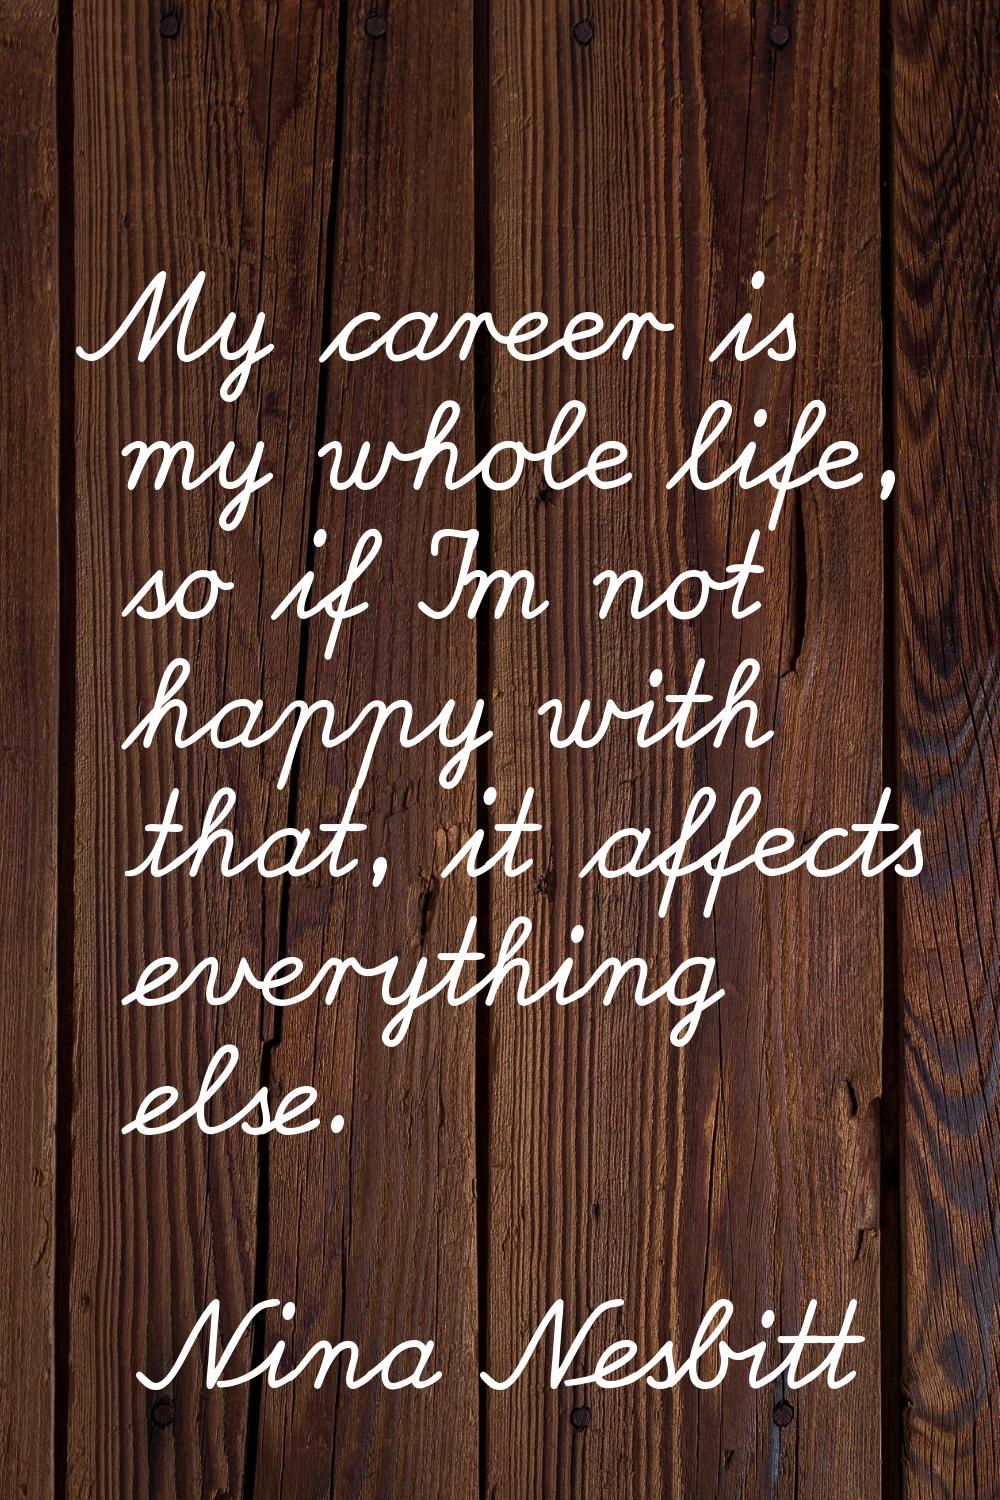 My career is my whole life, so if I'm not happy with that, it affects everything else.